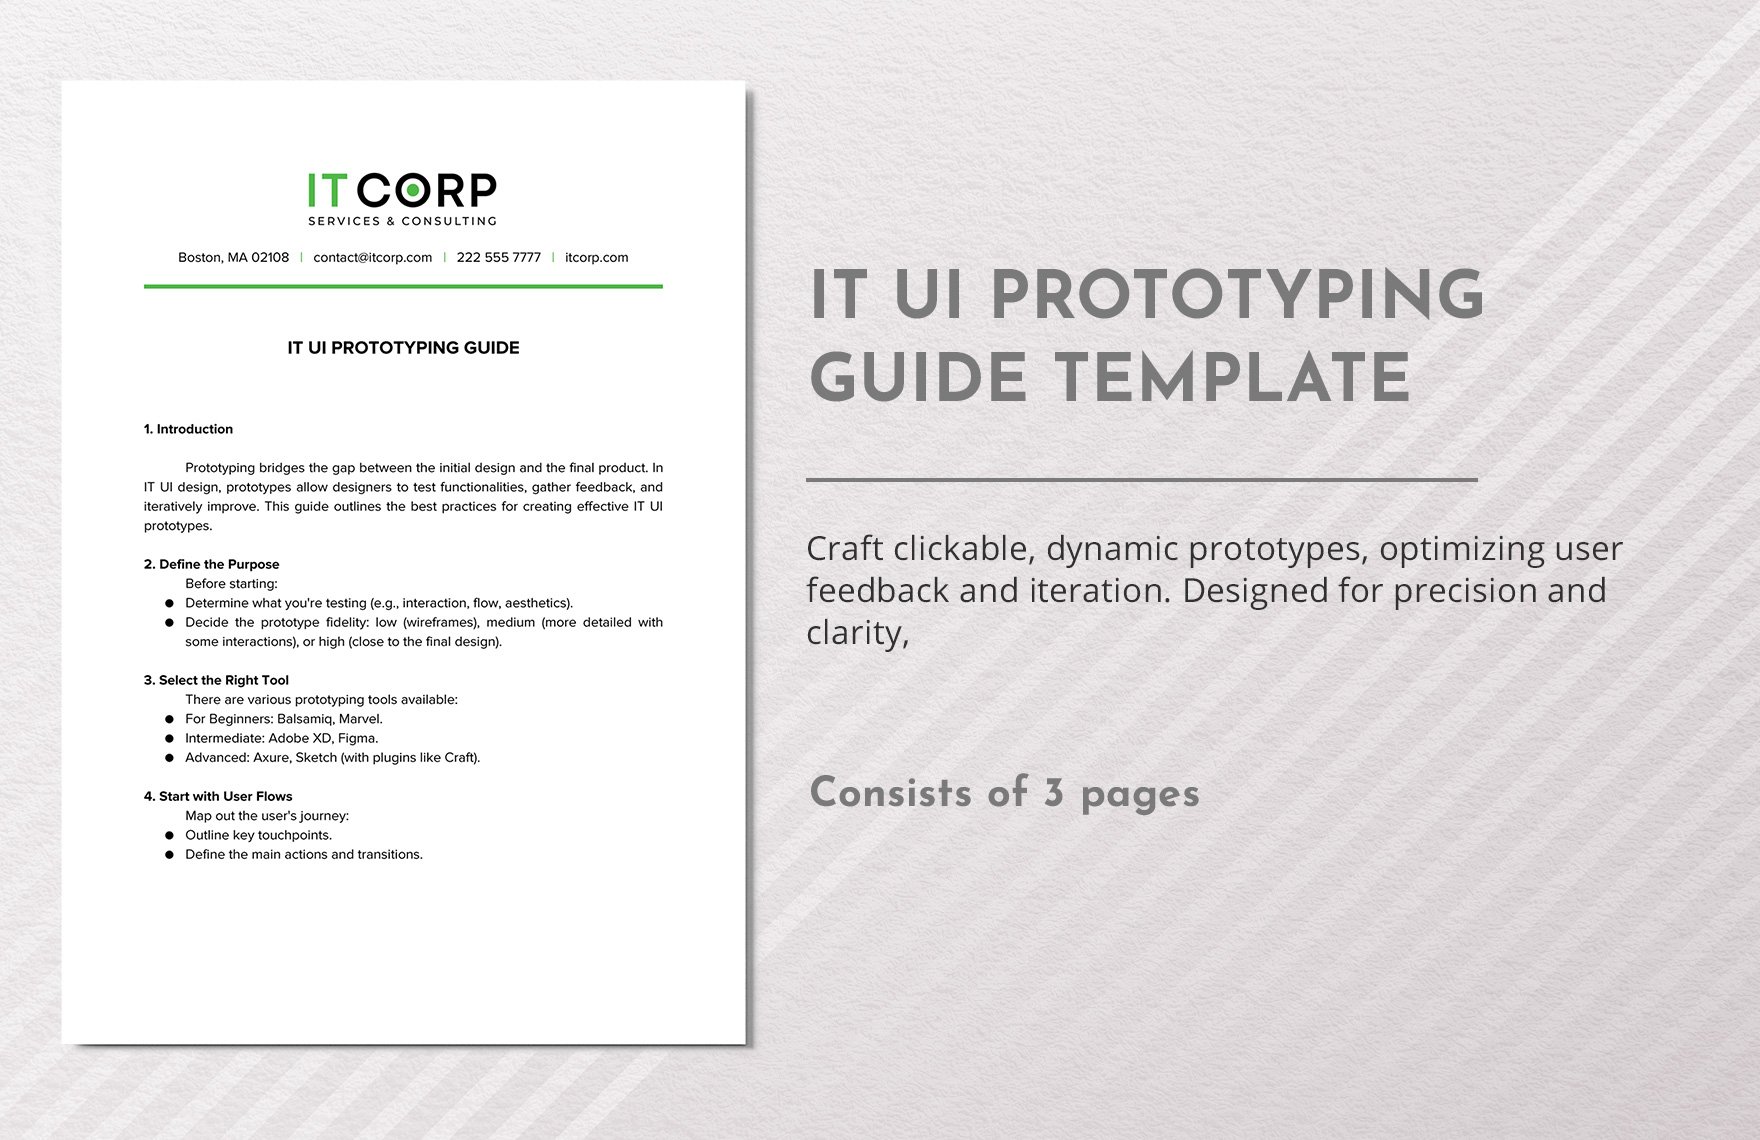 IT UI Prototyping Guide Template